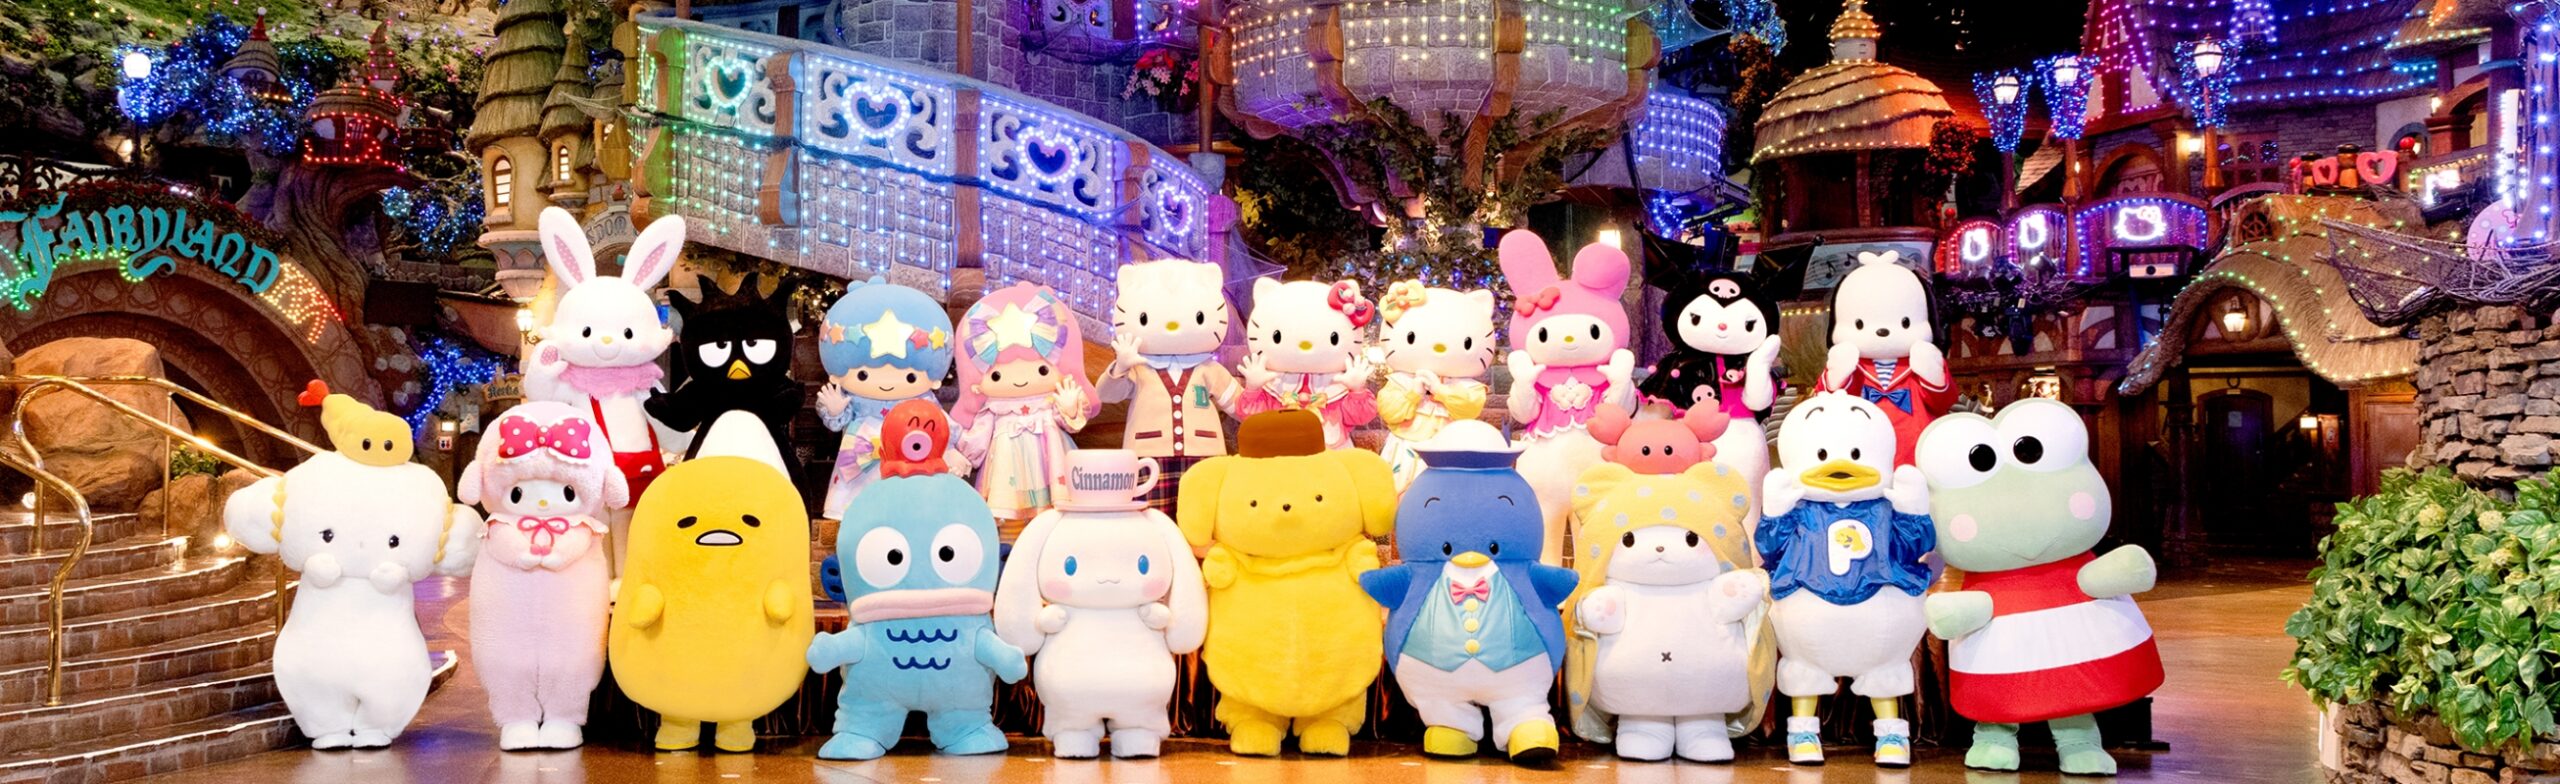 Sanrio Puroland: Pastel Paradise With Cute Parades & Characters Come To Life